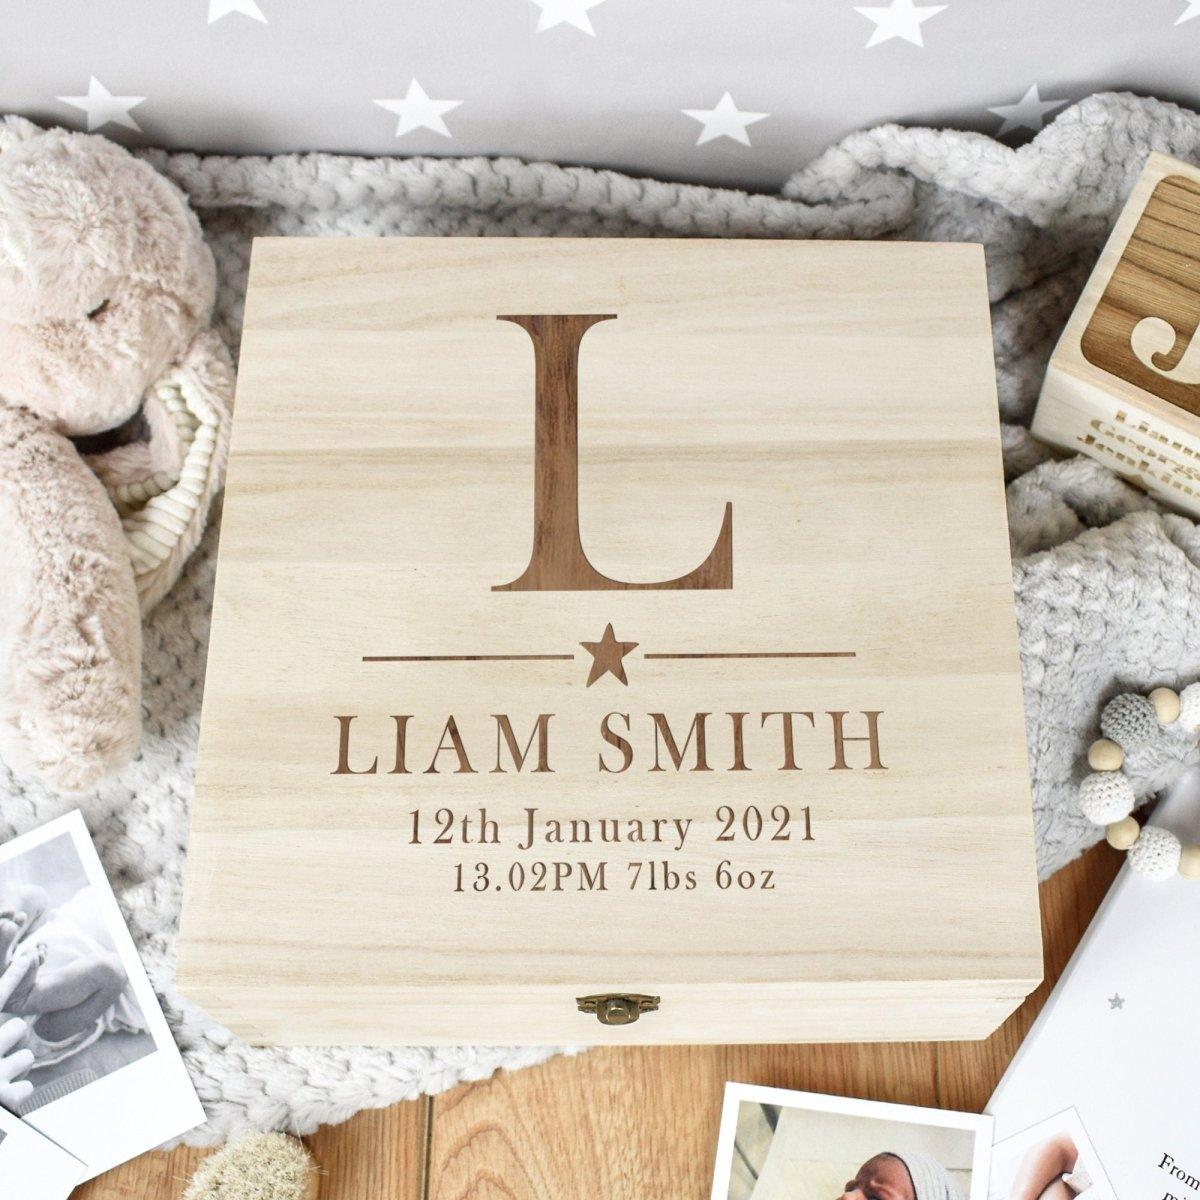 Personalised Engraved Wooden Baby Box, Baby Memory Box, Newborn Keepsake Box, New Baby Gift, Engraved Wood Box, Special Memories Baby Box - Amy Lucy